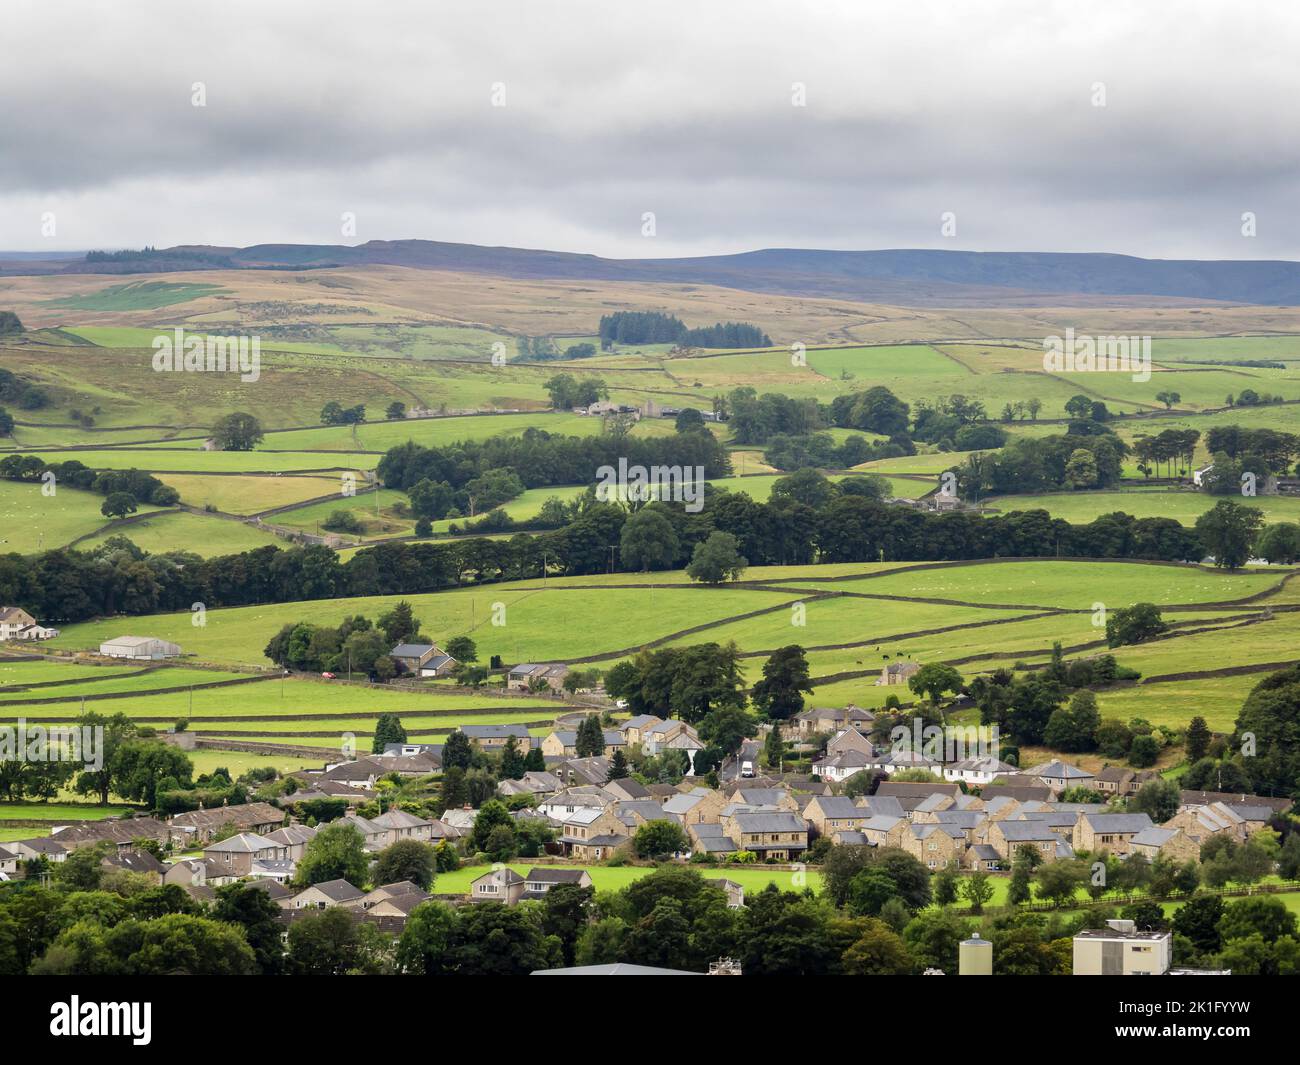 Looking down on Settle, Yorkshire Dales, UK. Stock Photo